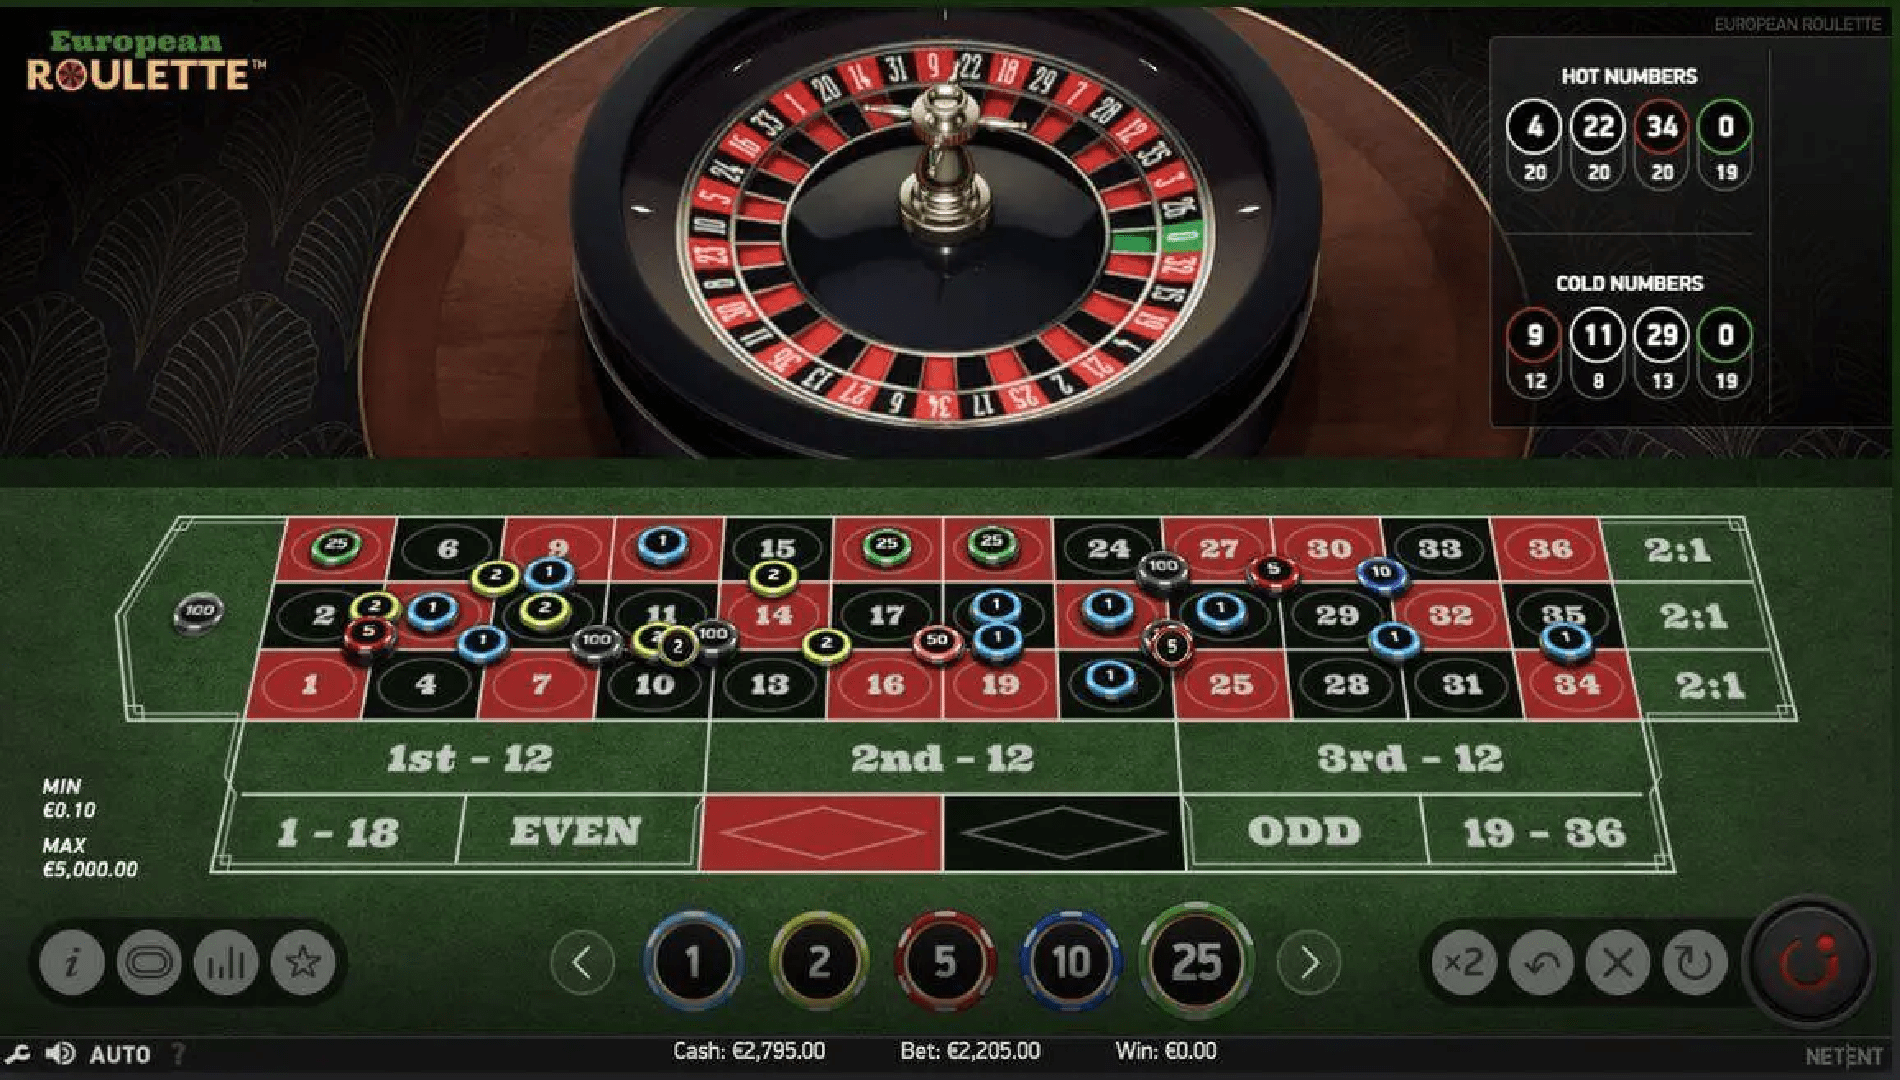 Roulette Tips From The Experts - Best Advices